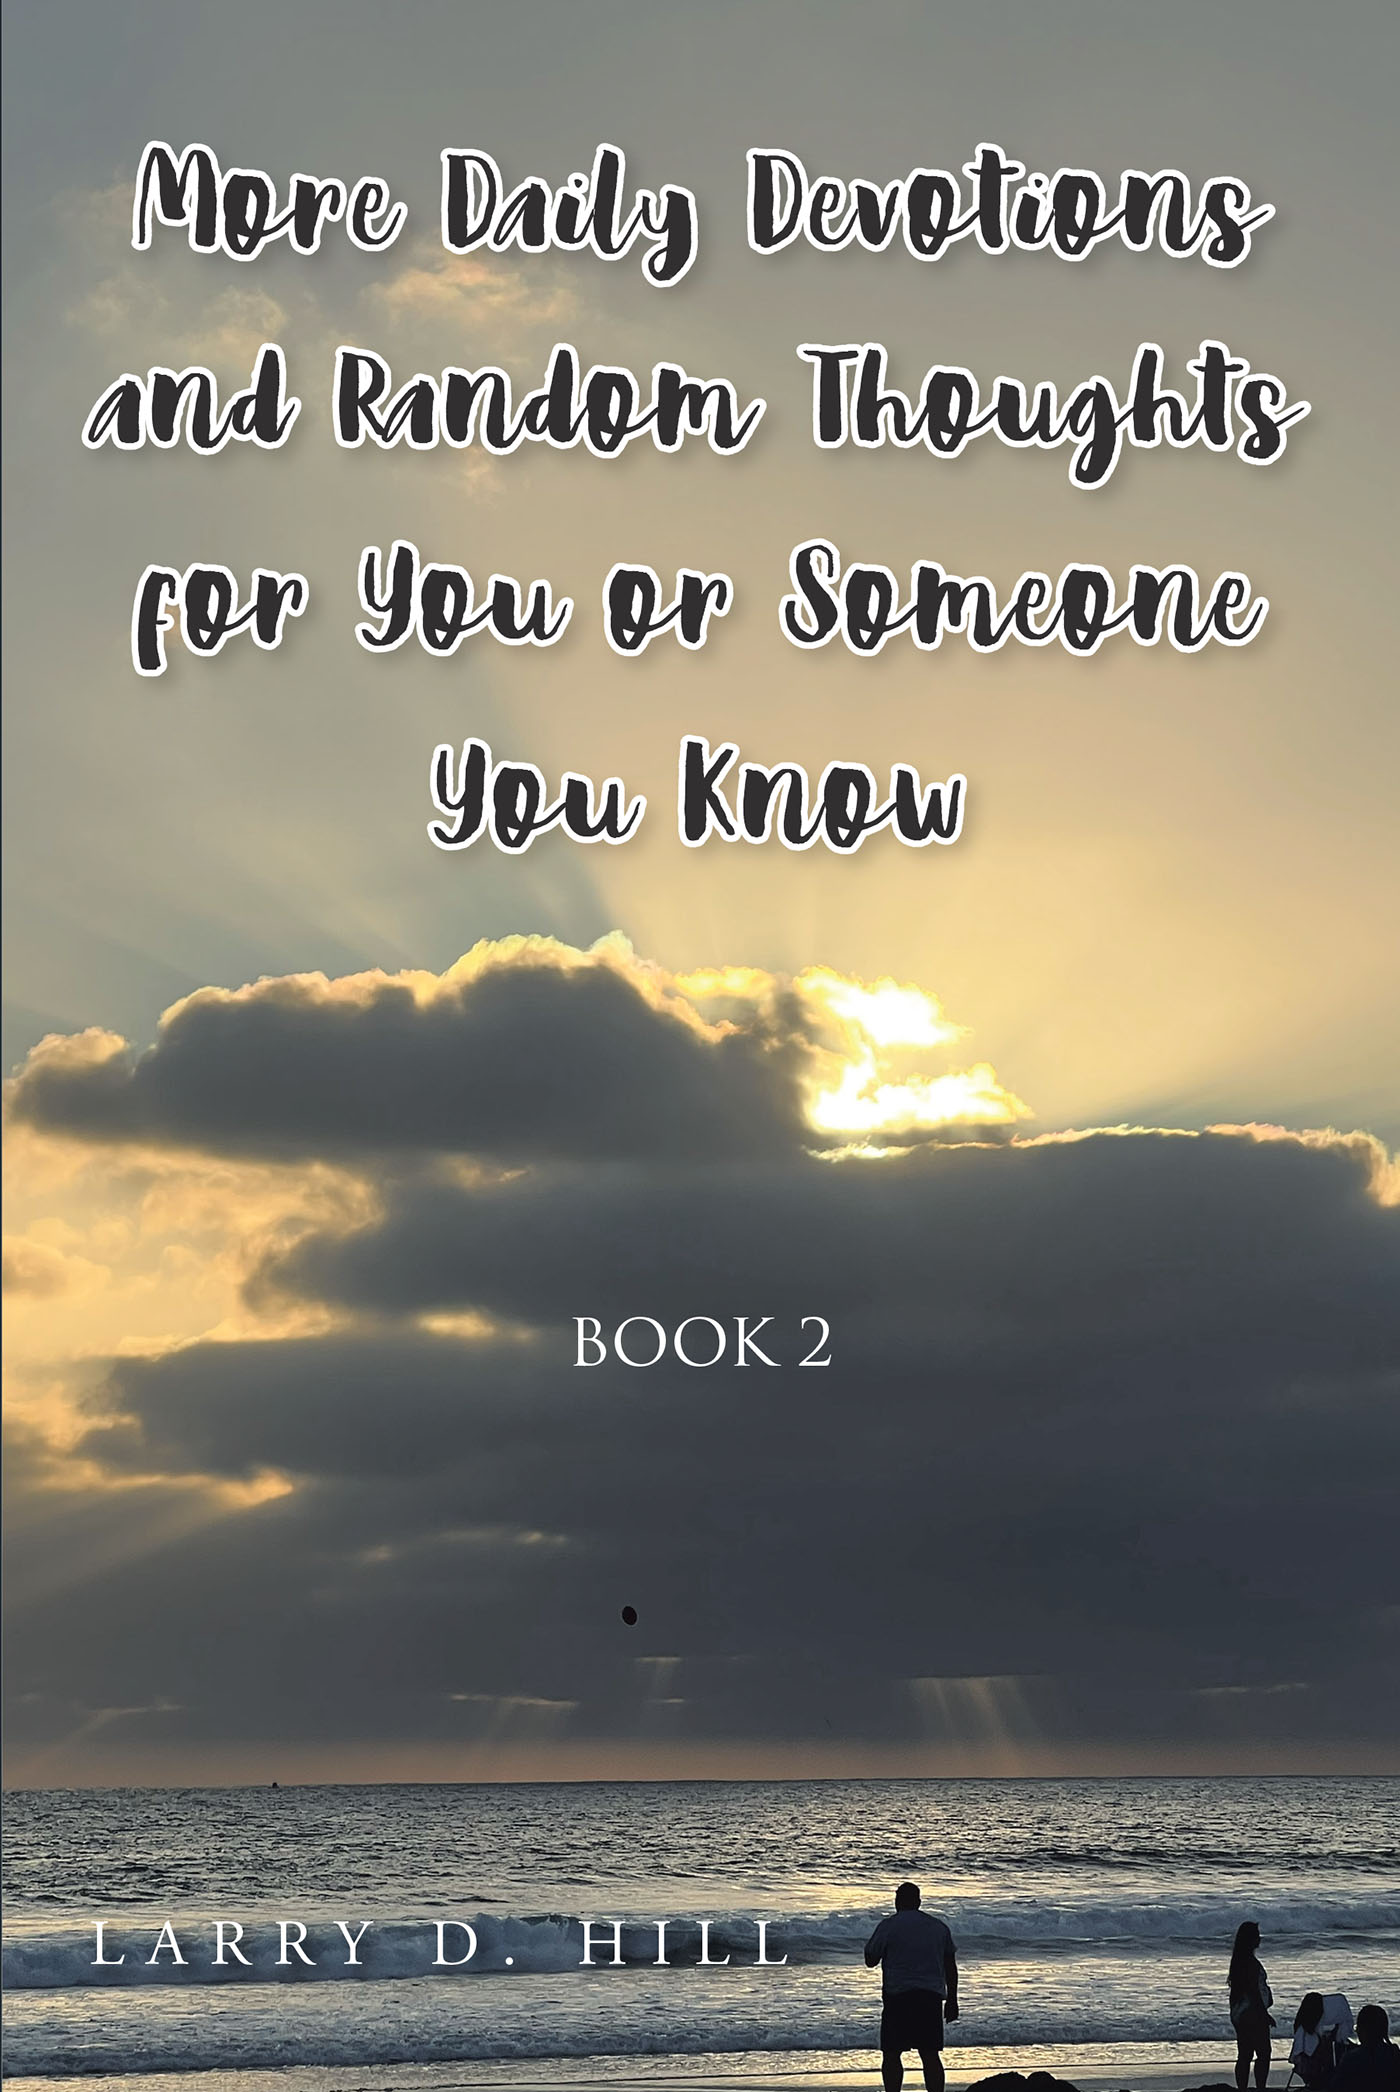 Larry D. Hill’s Newly Released “More Daily Devotions and Random Thoughts For You or Someone You Know: Book 2” is a Continuation of the Author’s Encouraging Series